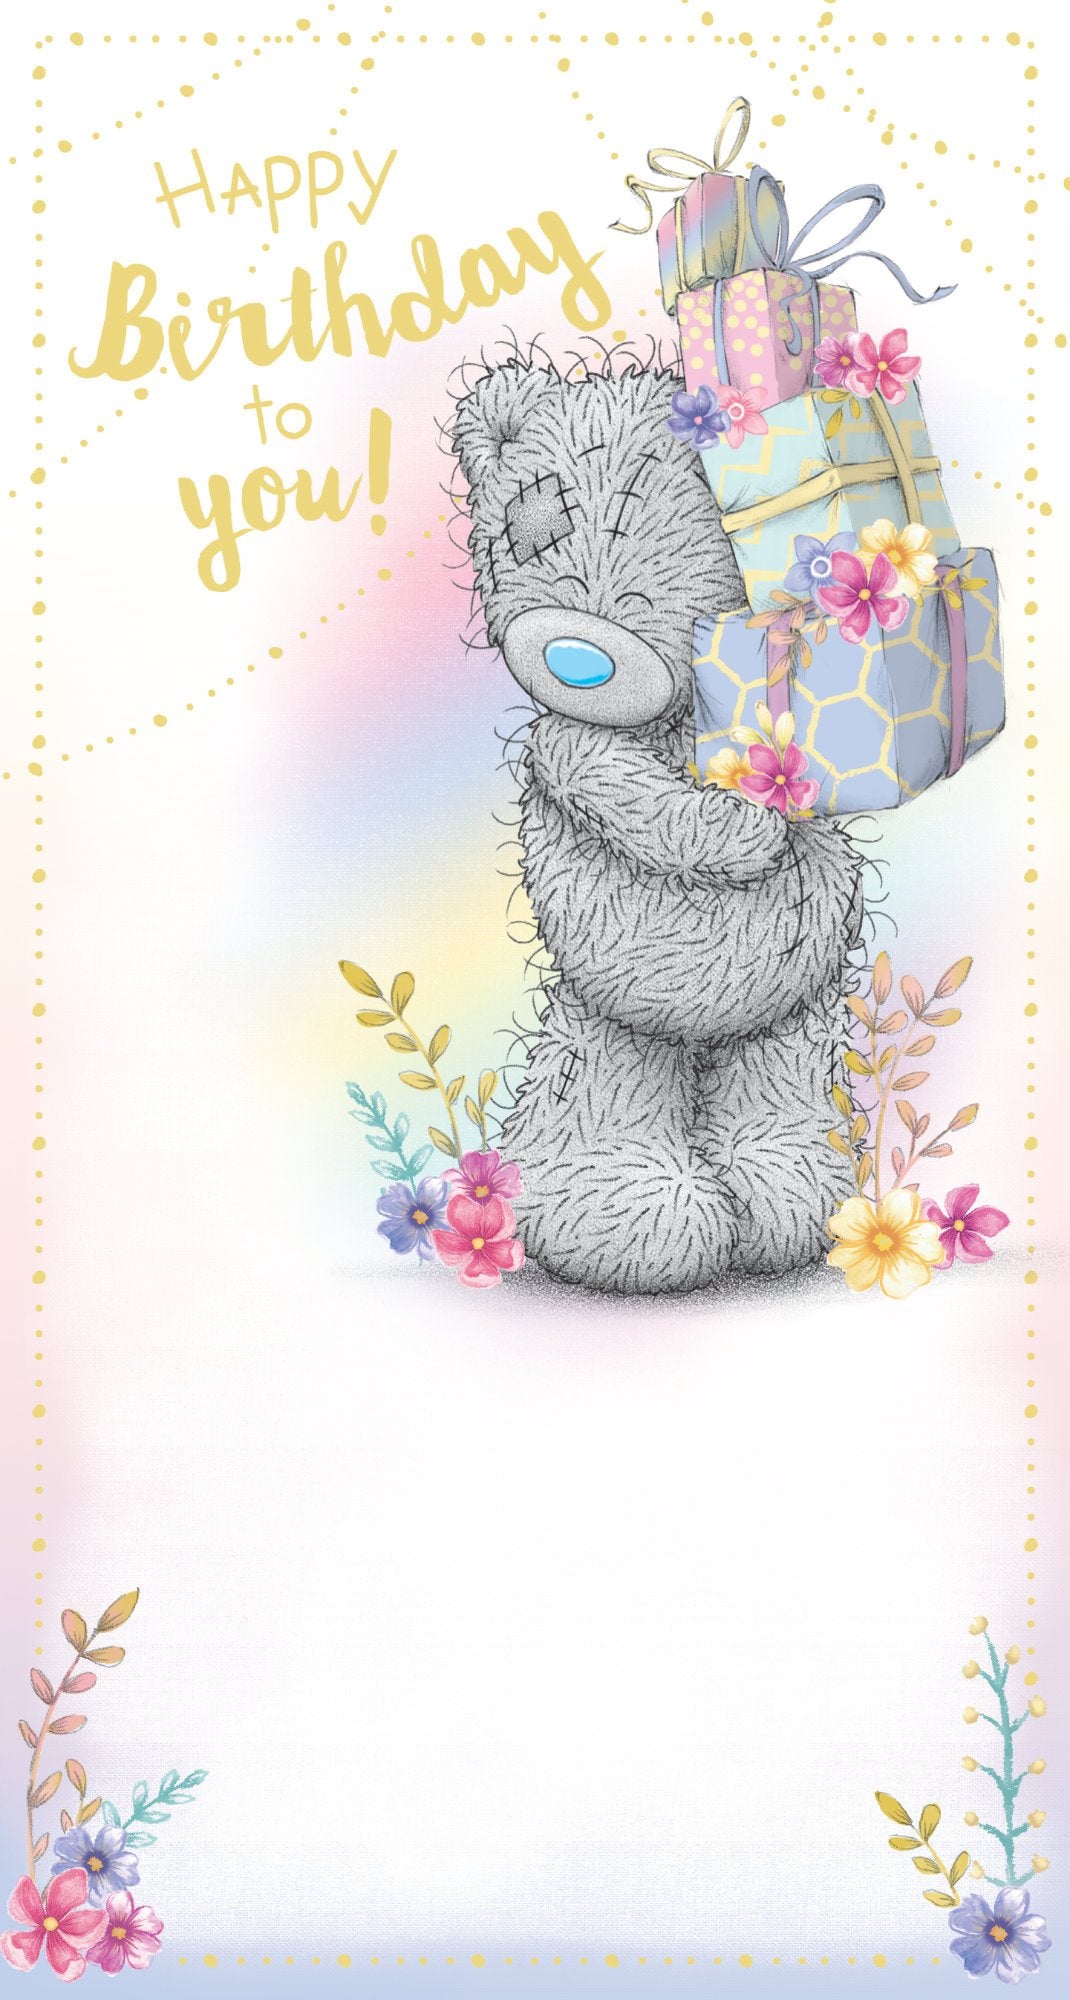 Photograph of Open Birthday Bear Holding Gifts Greetings Card at Nicole's Shop